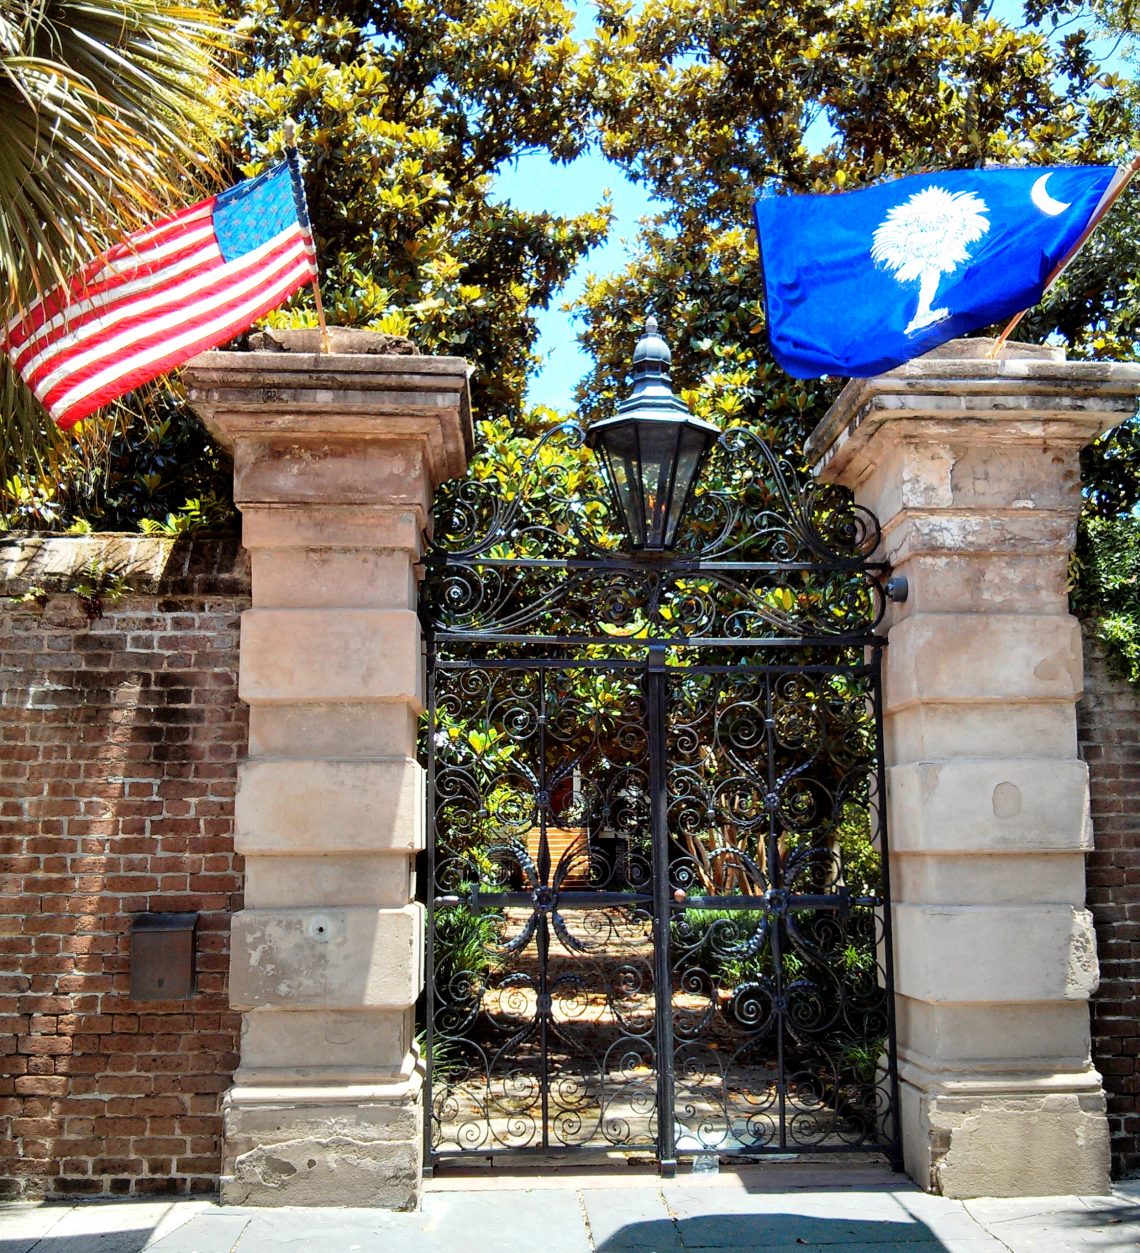 The American and South Carolina flags proudly displayed over the iconic Sword Gate. 